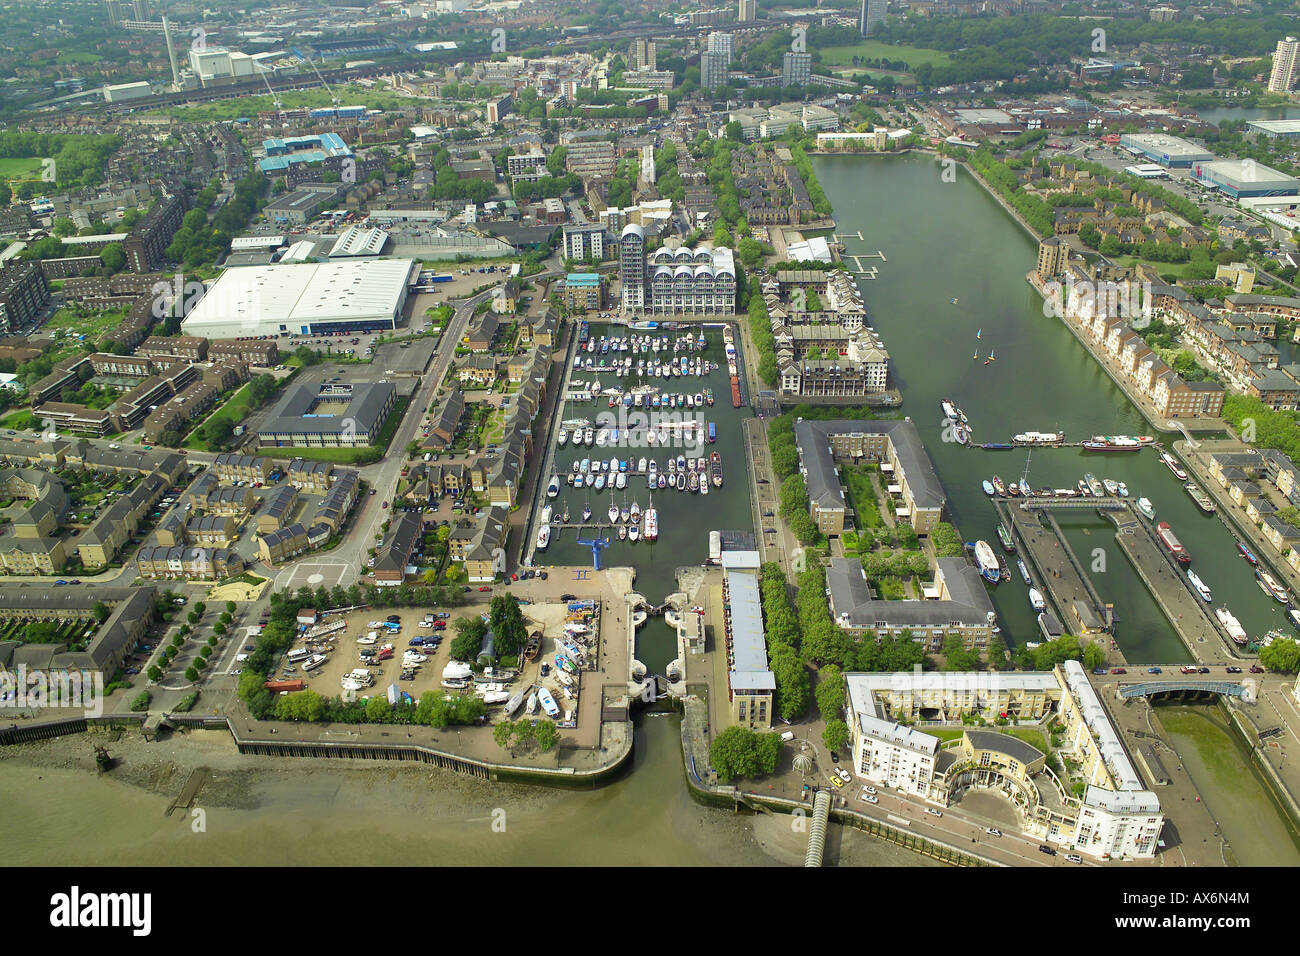 Aerial view of Rainbow Quay, South Dock and part of Greenland Dock in the Rotherhithe area of London, overlooking the Thamames Stock Photo